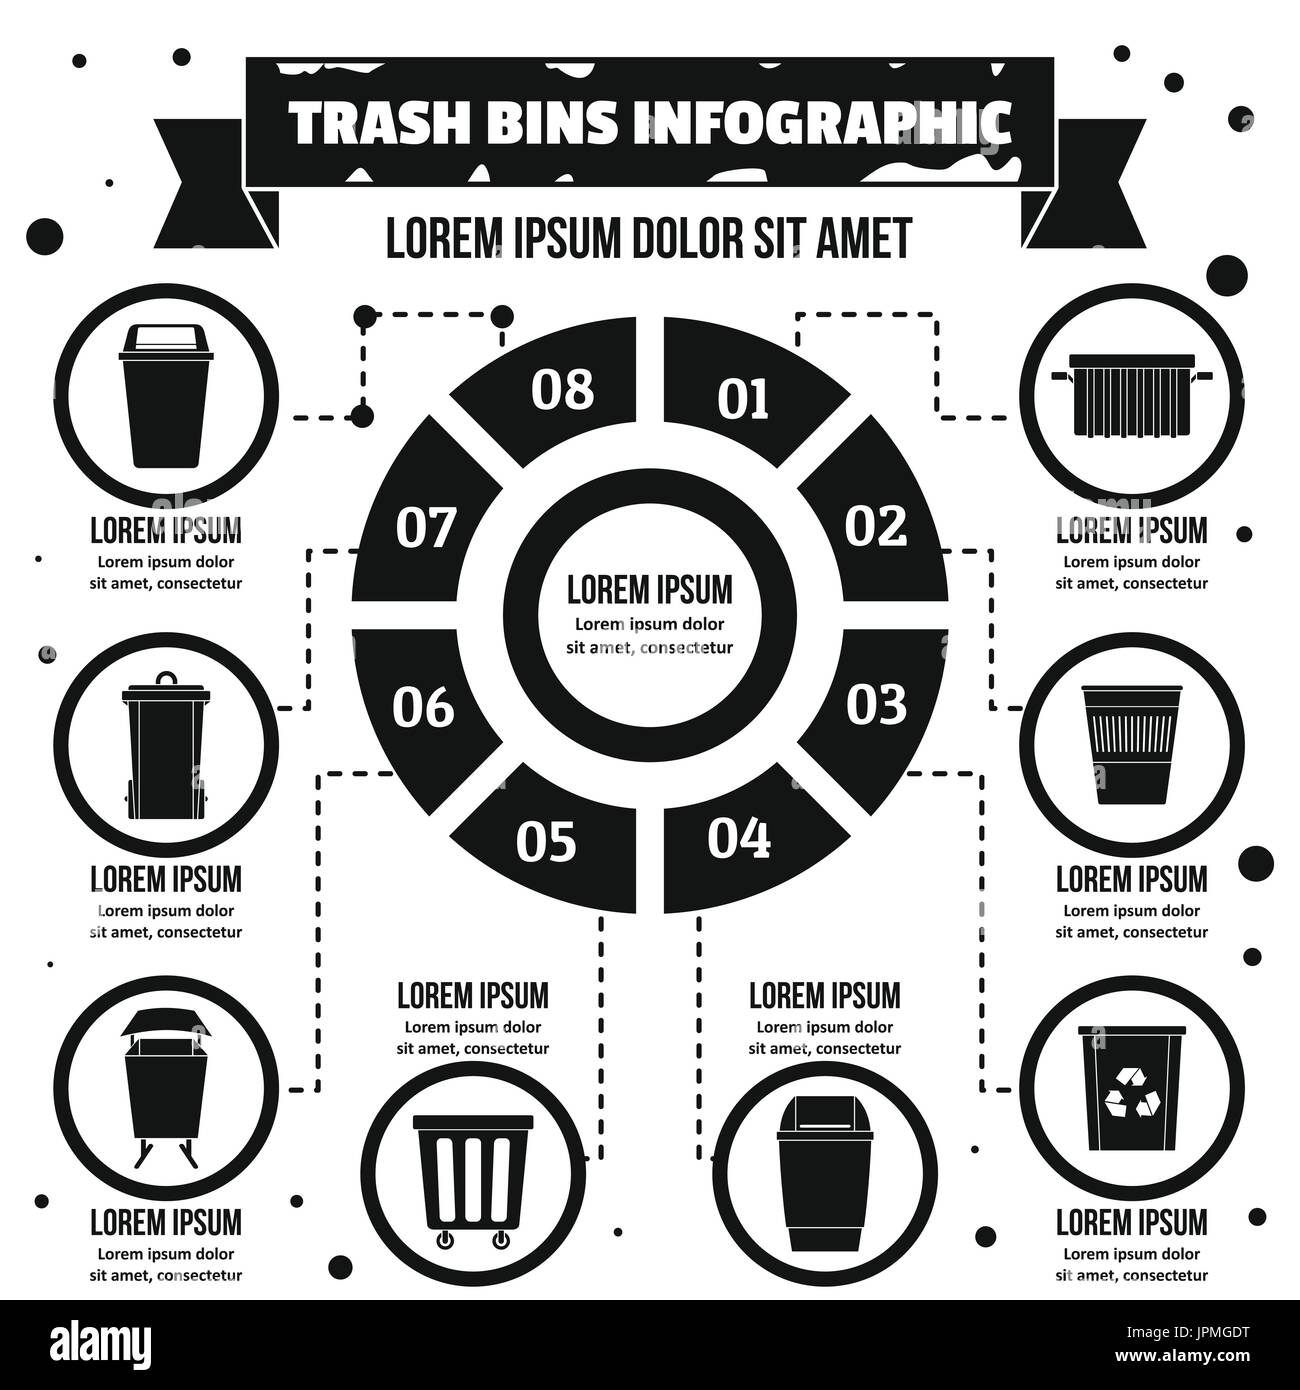 Trash bins infographic concept, simple style Stock Vector